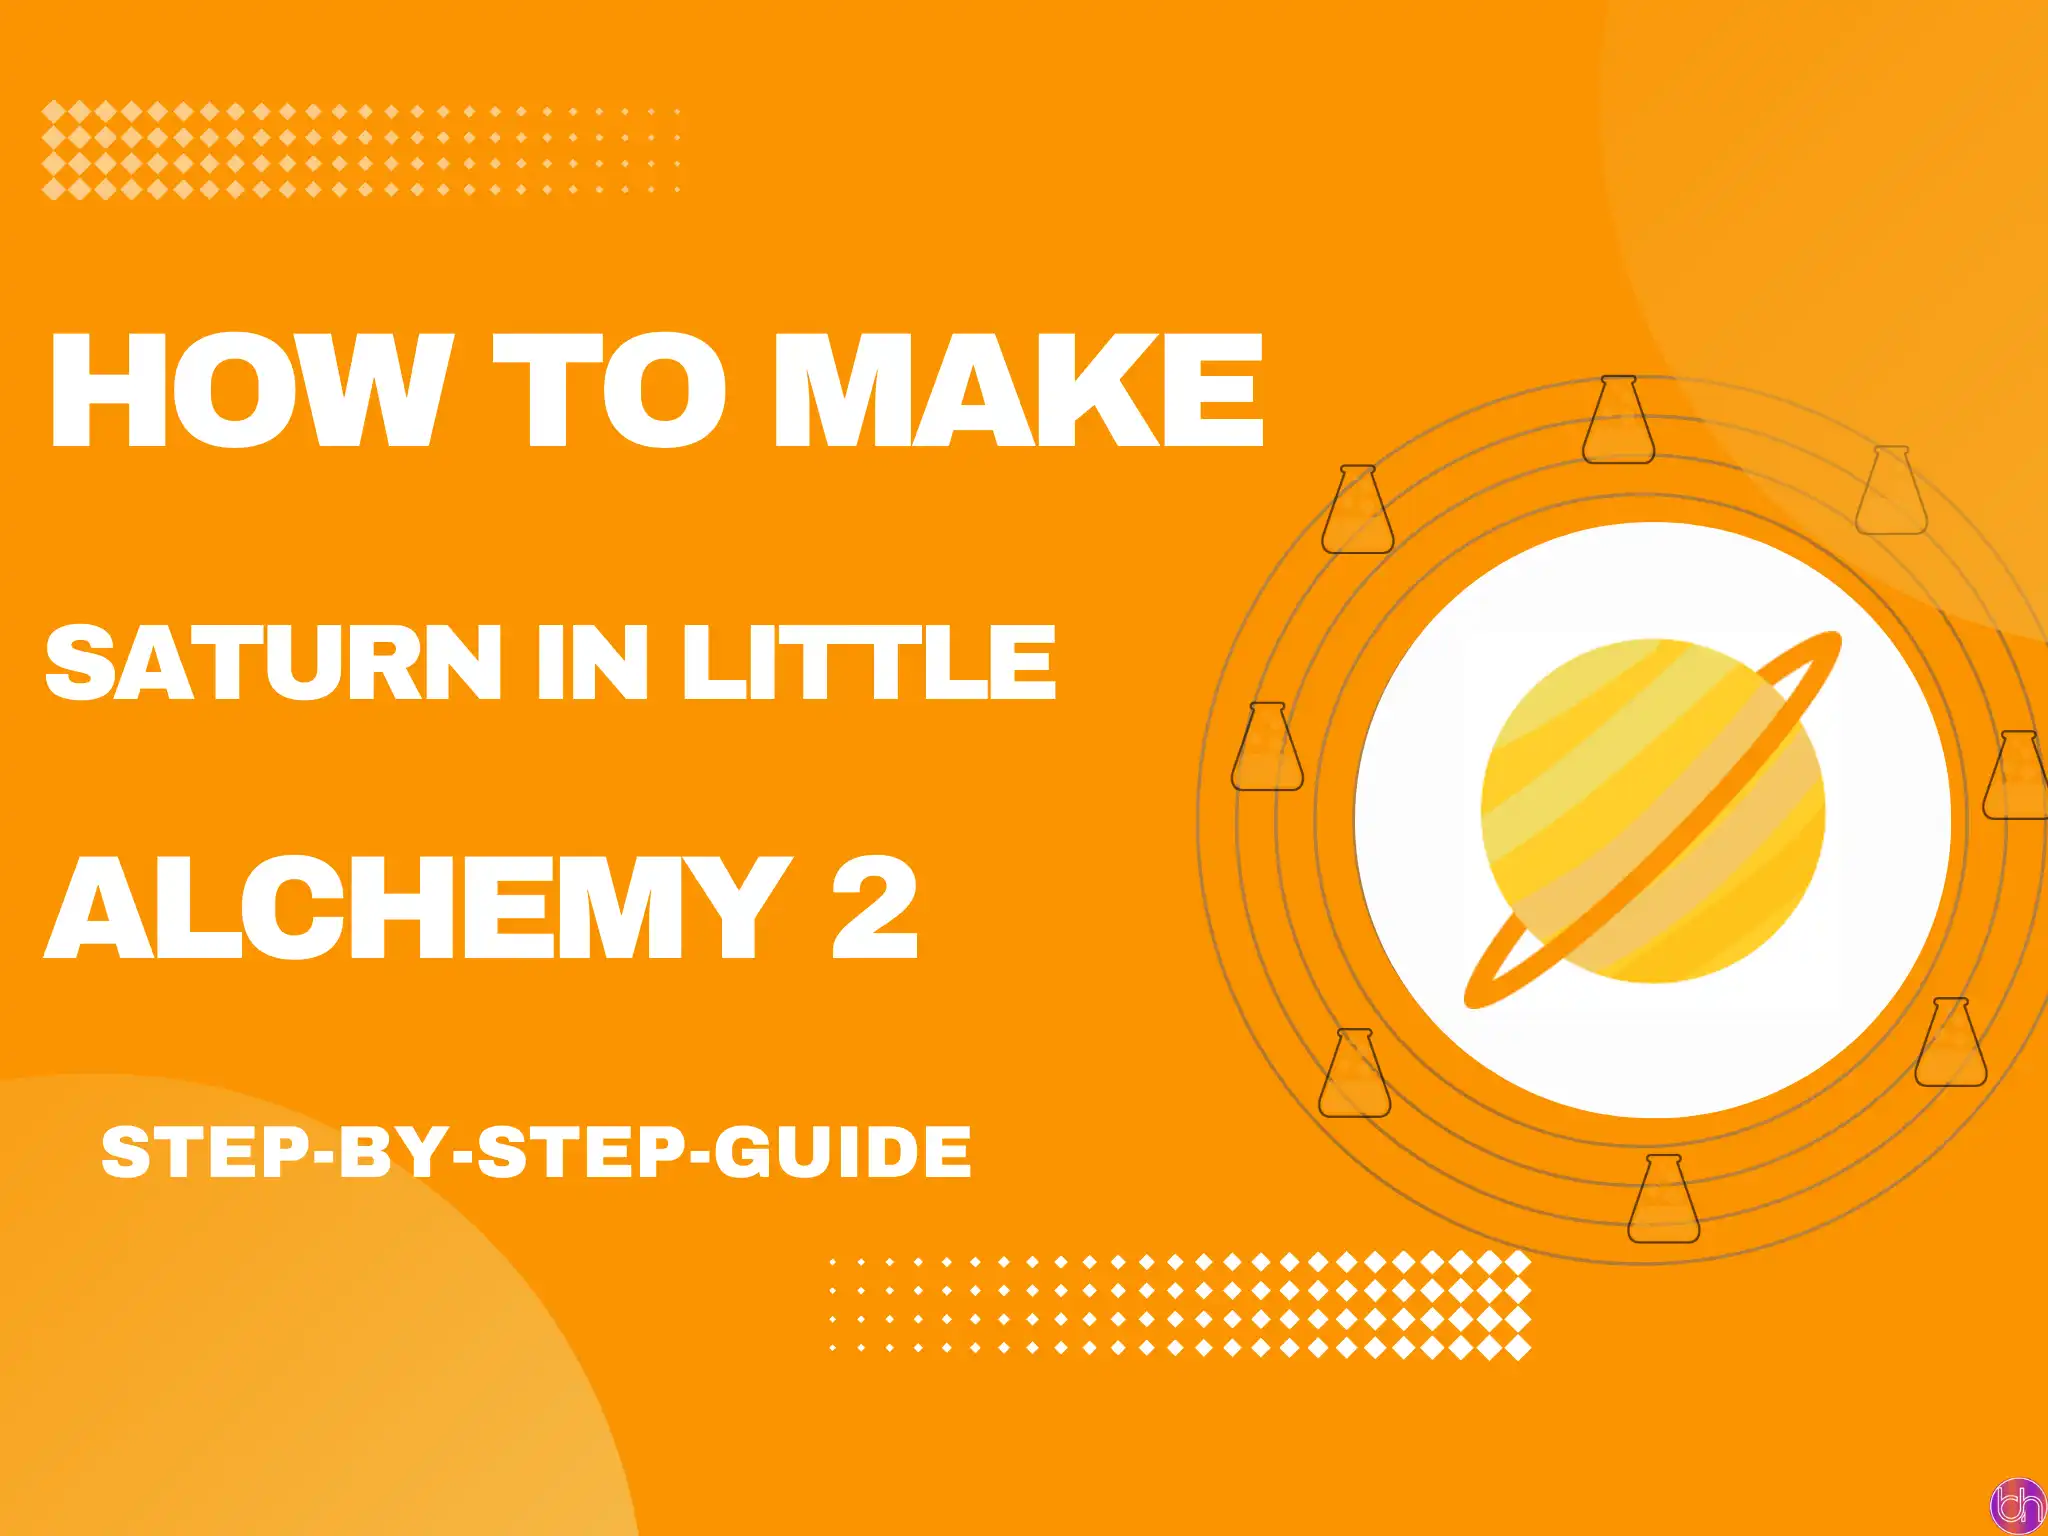 How to make Saturn in Little Alchemy 2